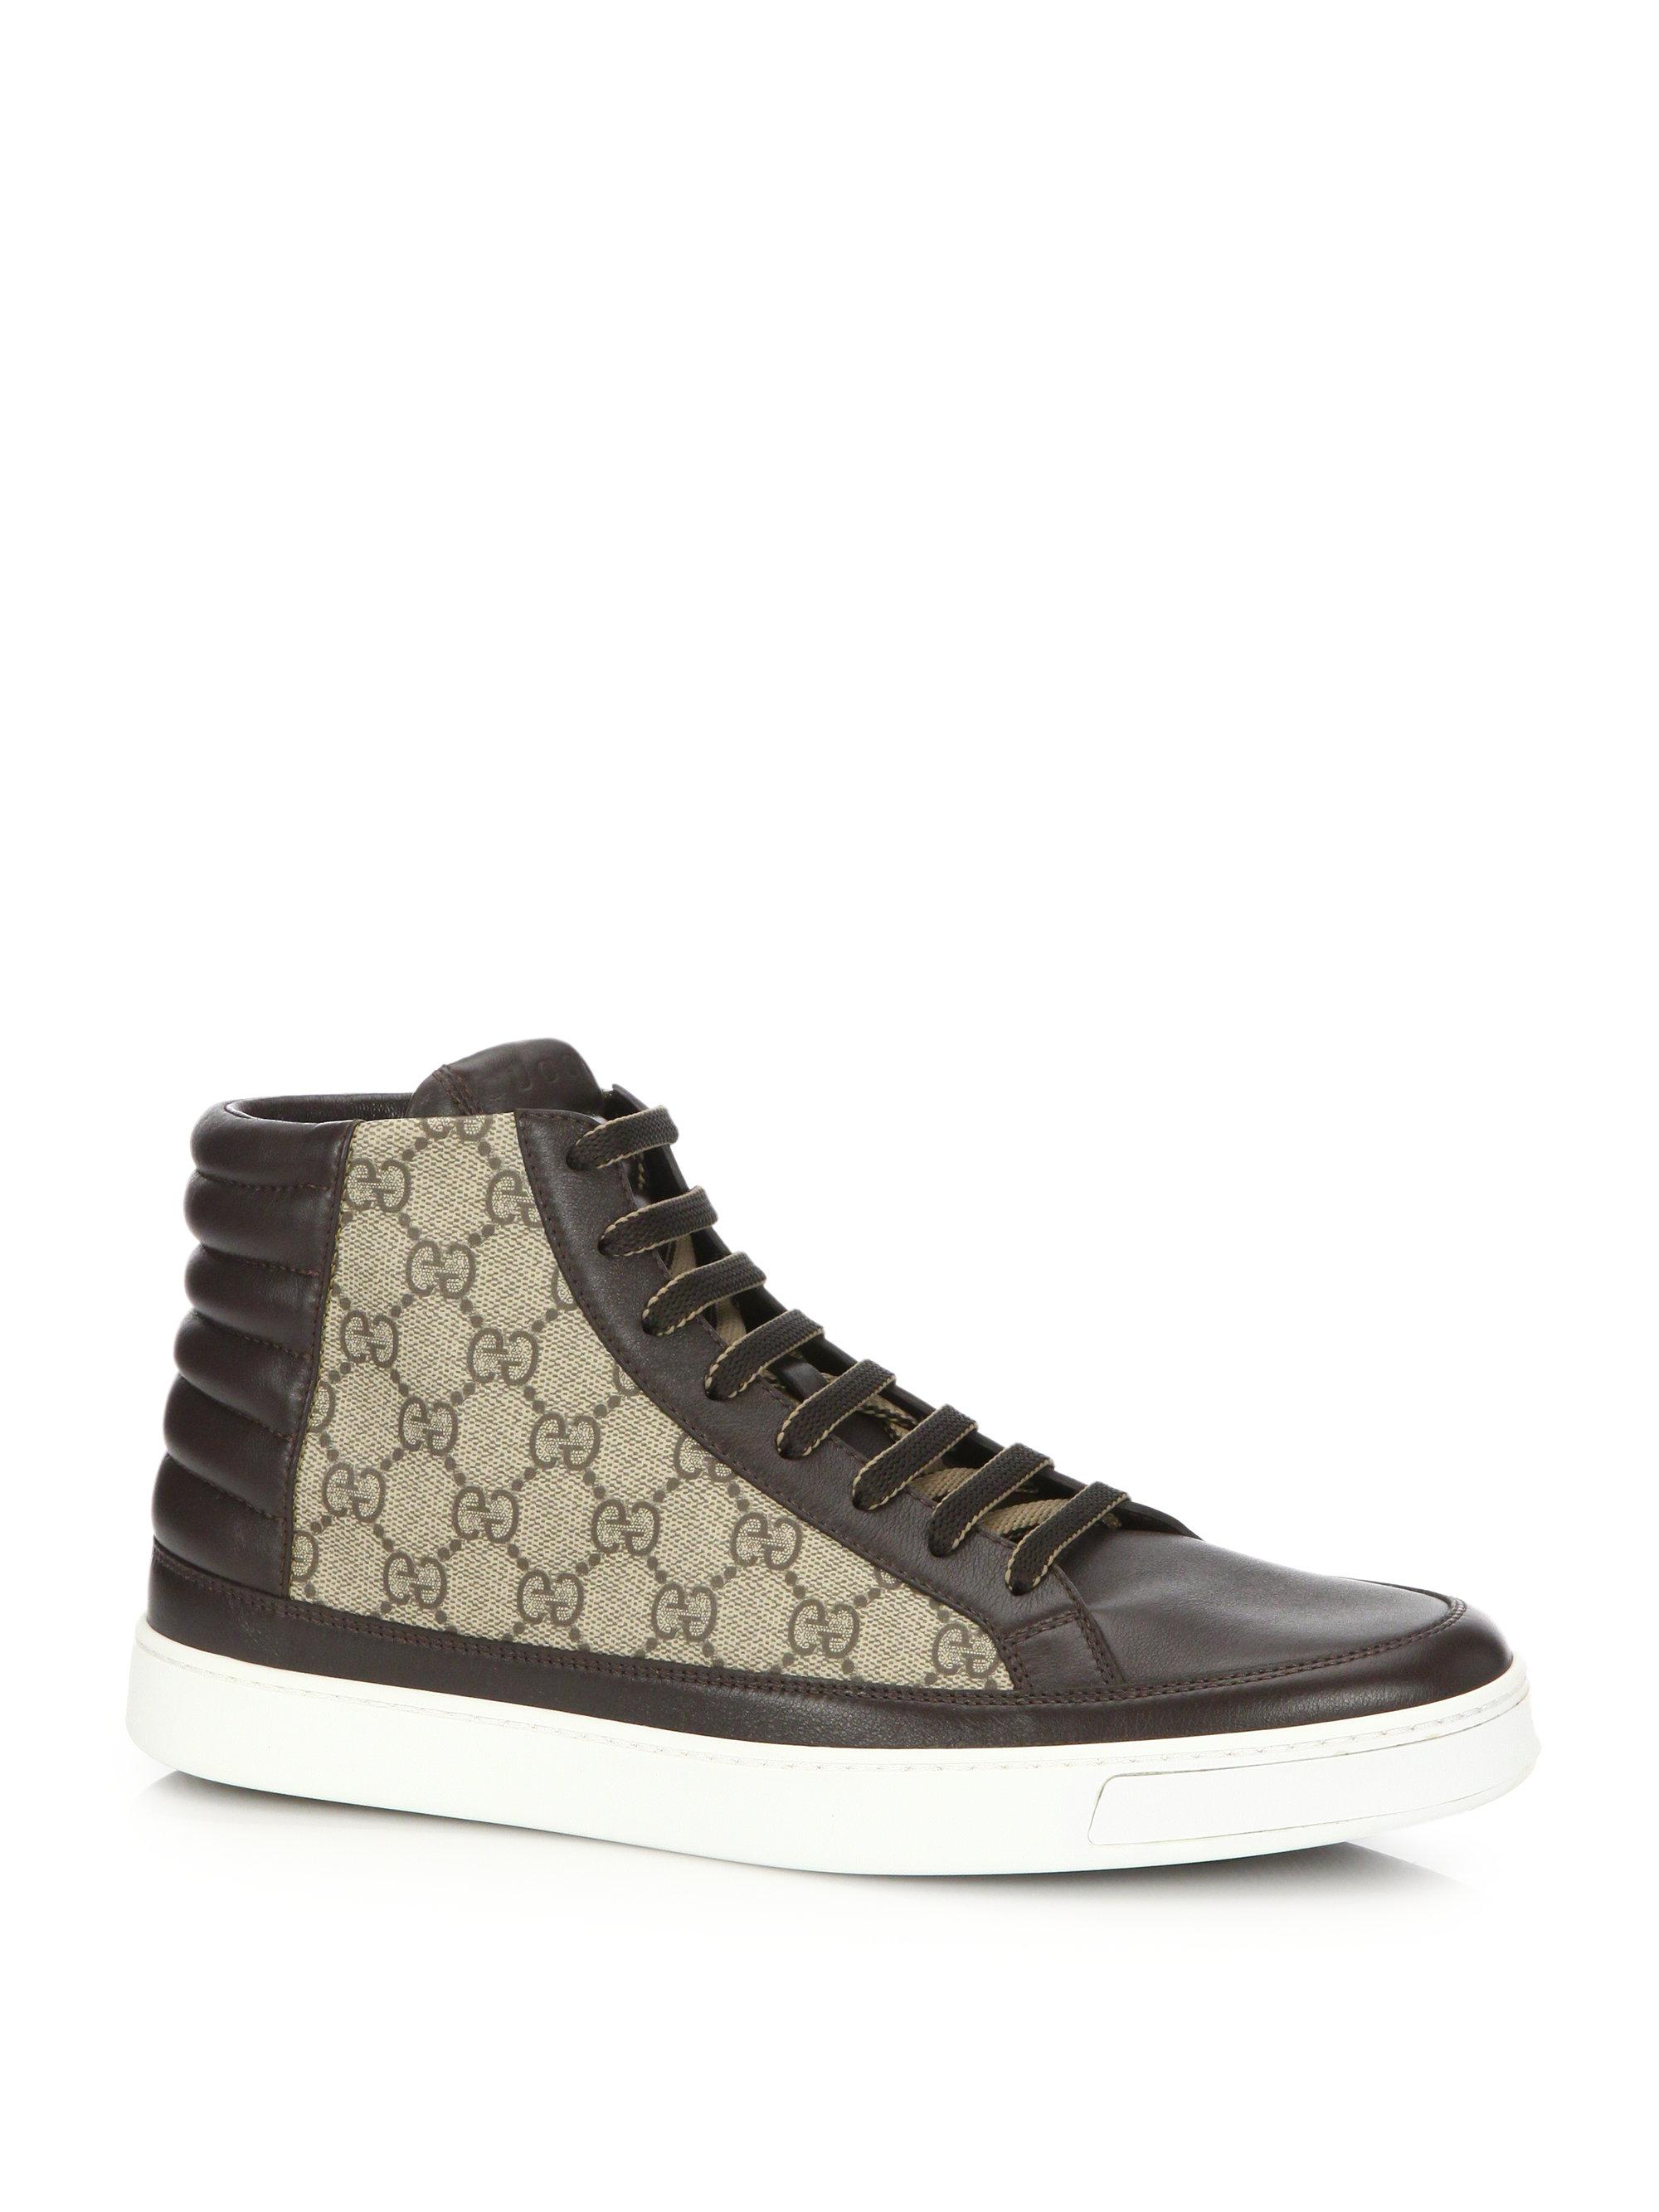 Lyst - Gucci Gg Supreme High-top Sneakers in Brown for Men